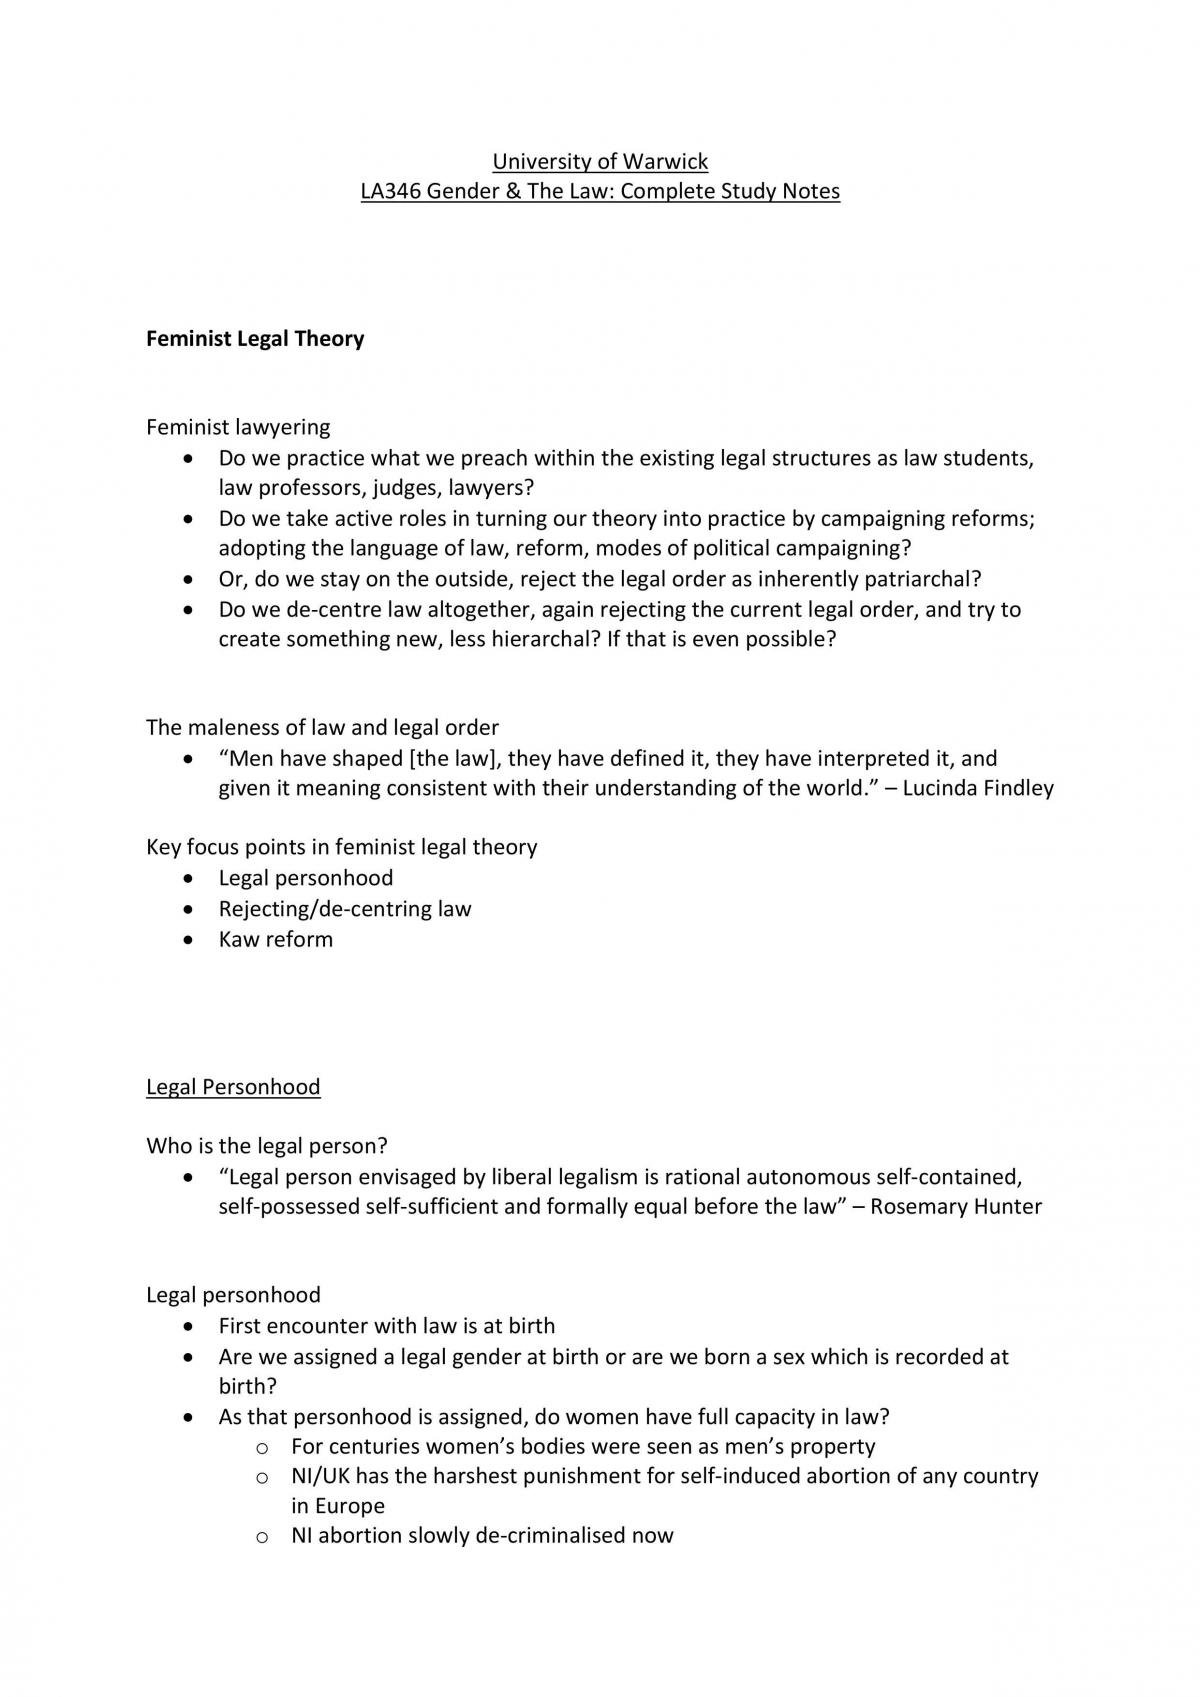 Gender & the Law Study Notes - Page 1